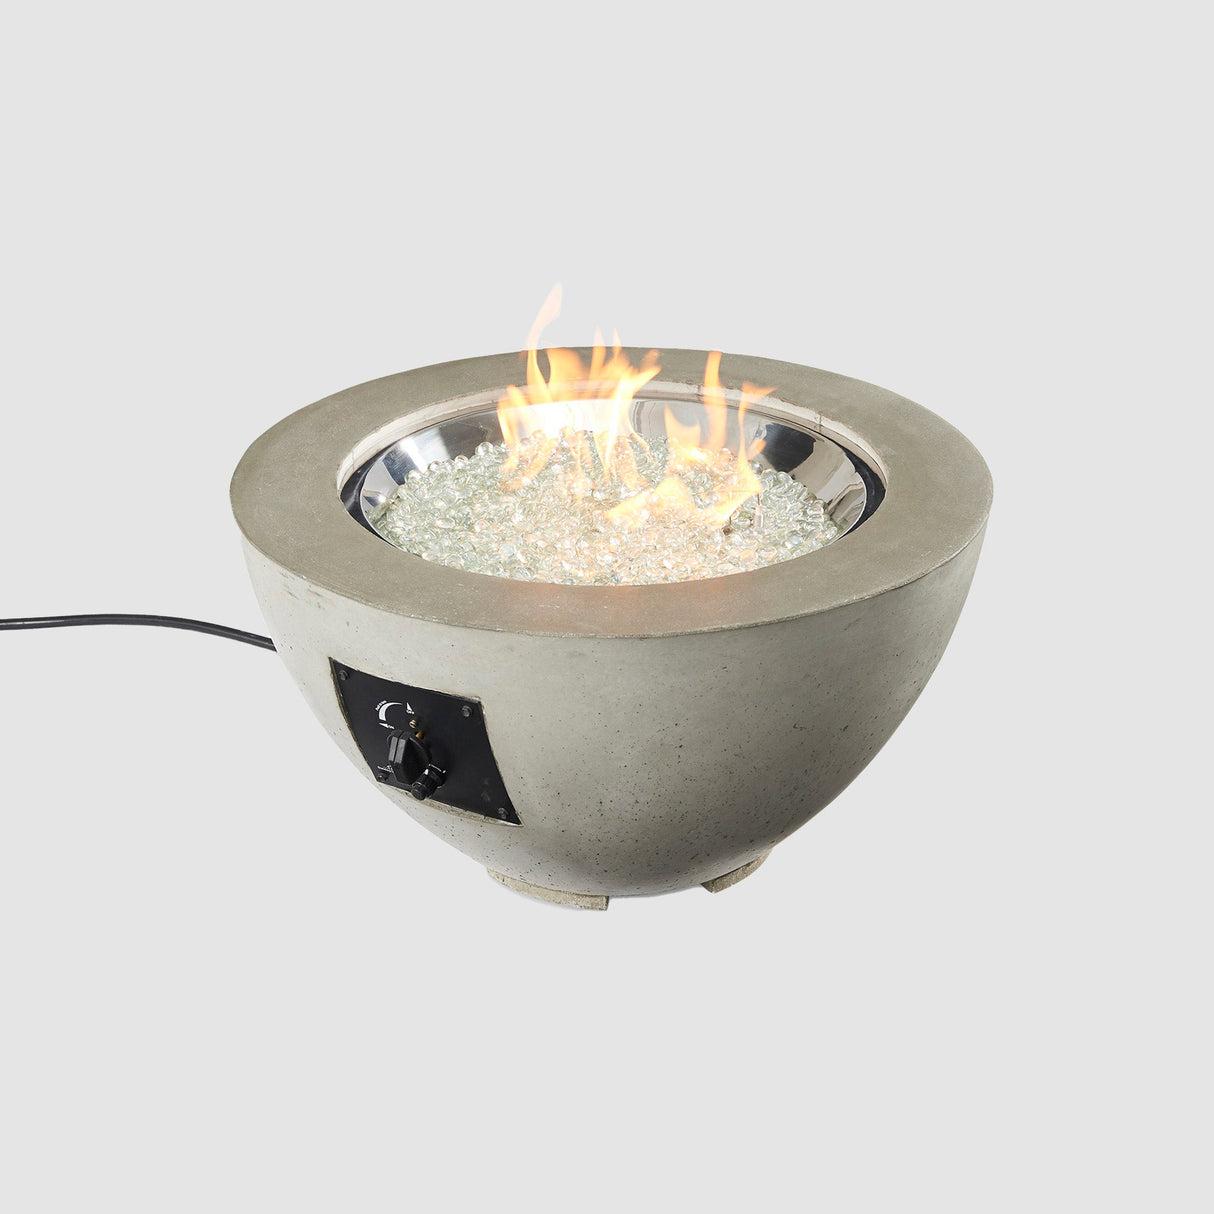 Cove Round Gas Fire Pit Bowl 29"